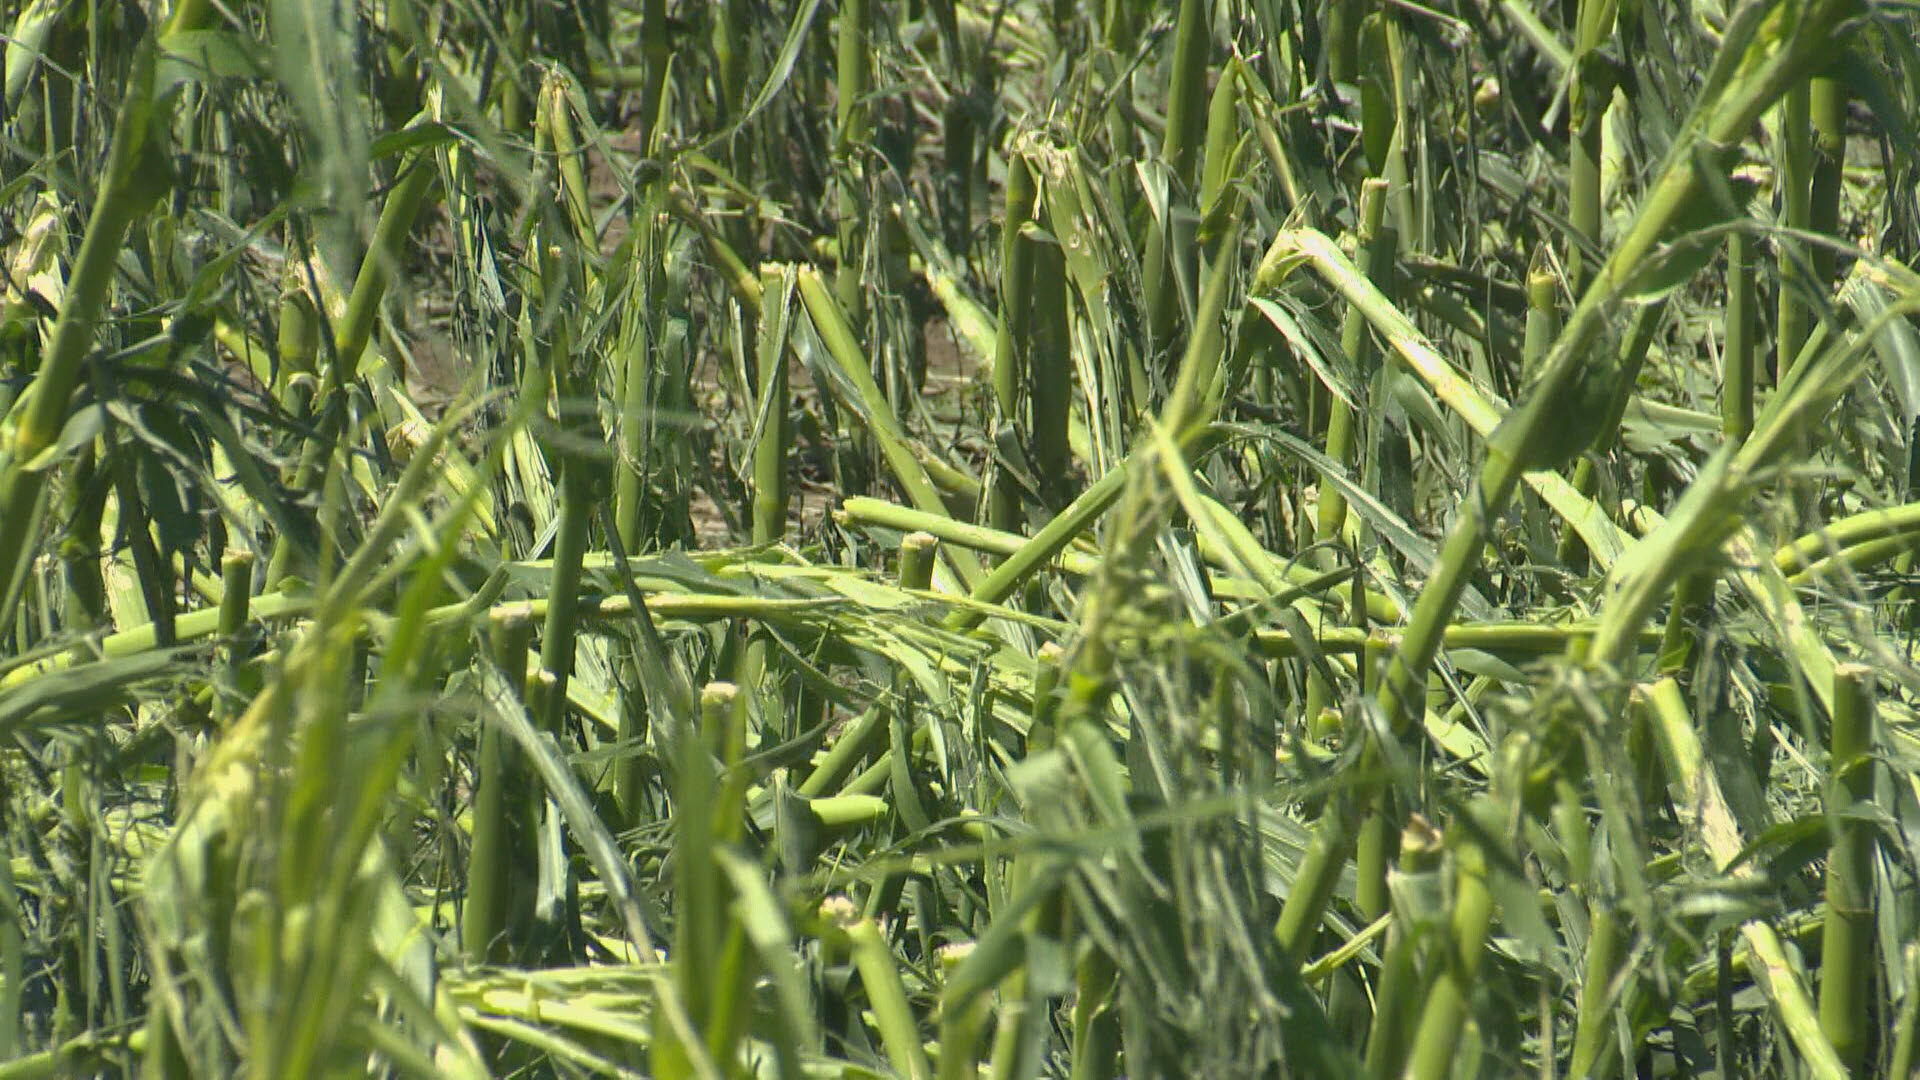 Corn crops were snapped in half after Monday's storm in southern Alberta.